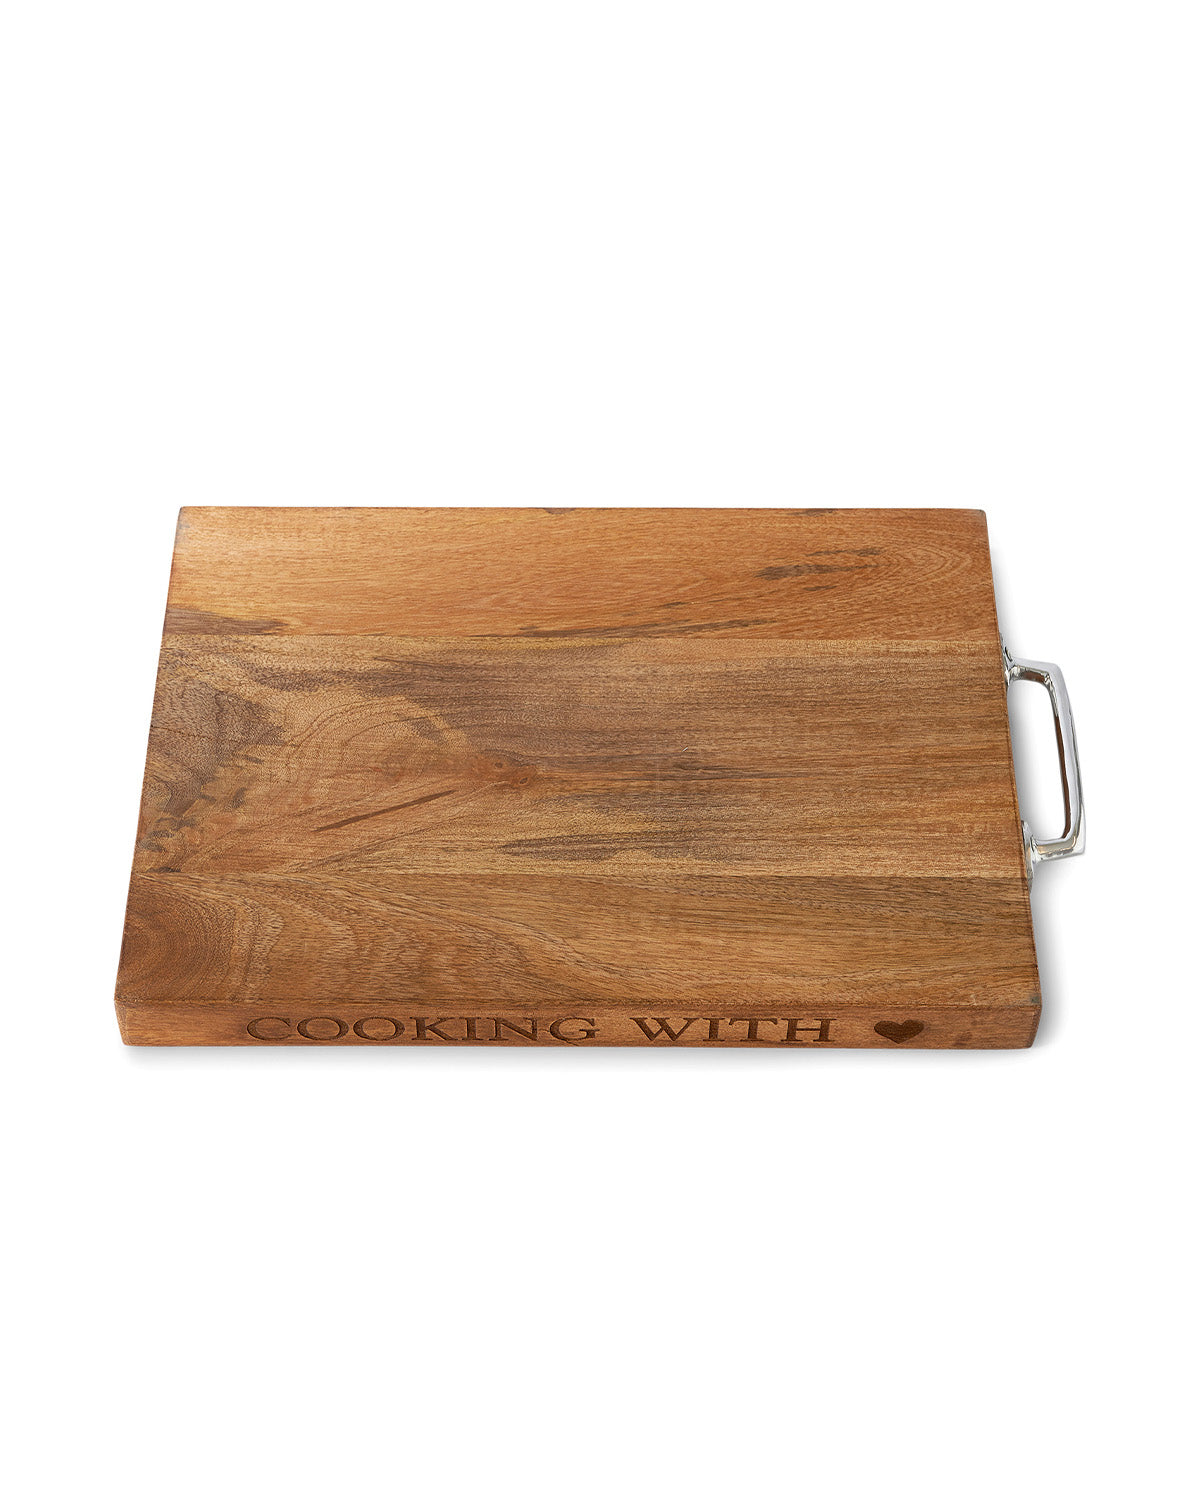 CUTTING BOARD sturdy cutting board with "Cooking with Love" written on the side by Riviera Maison